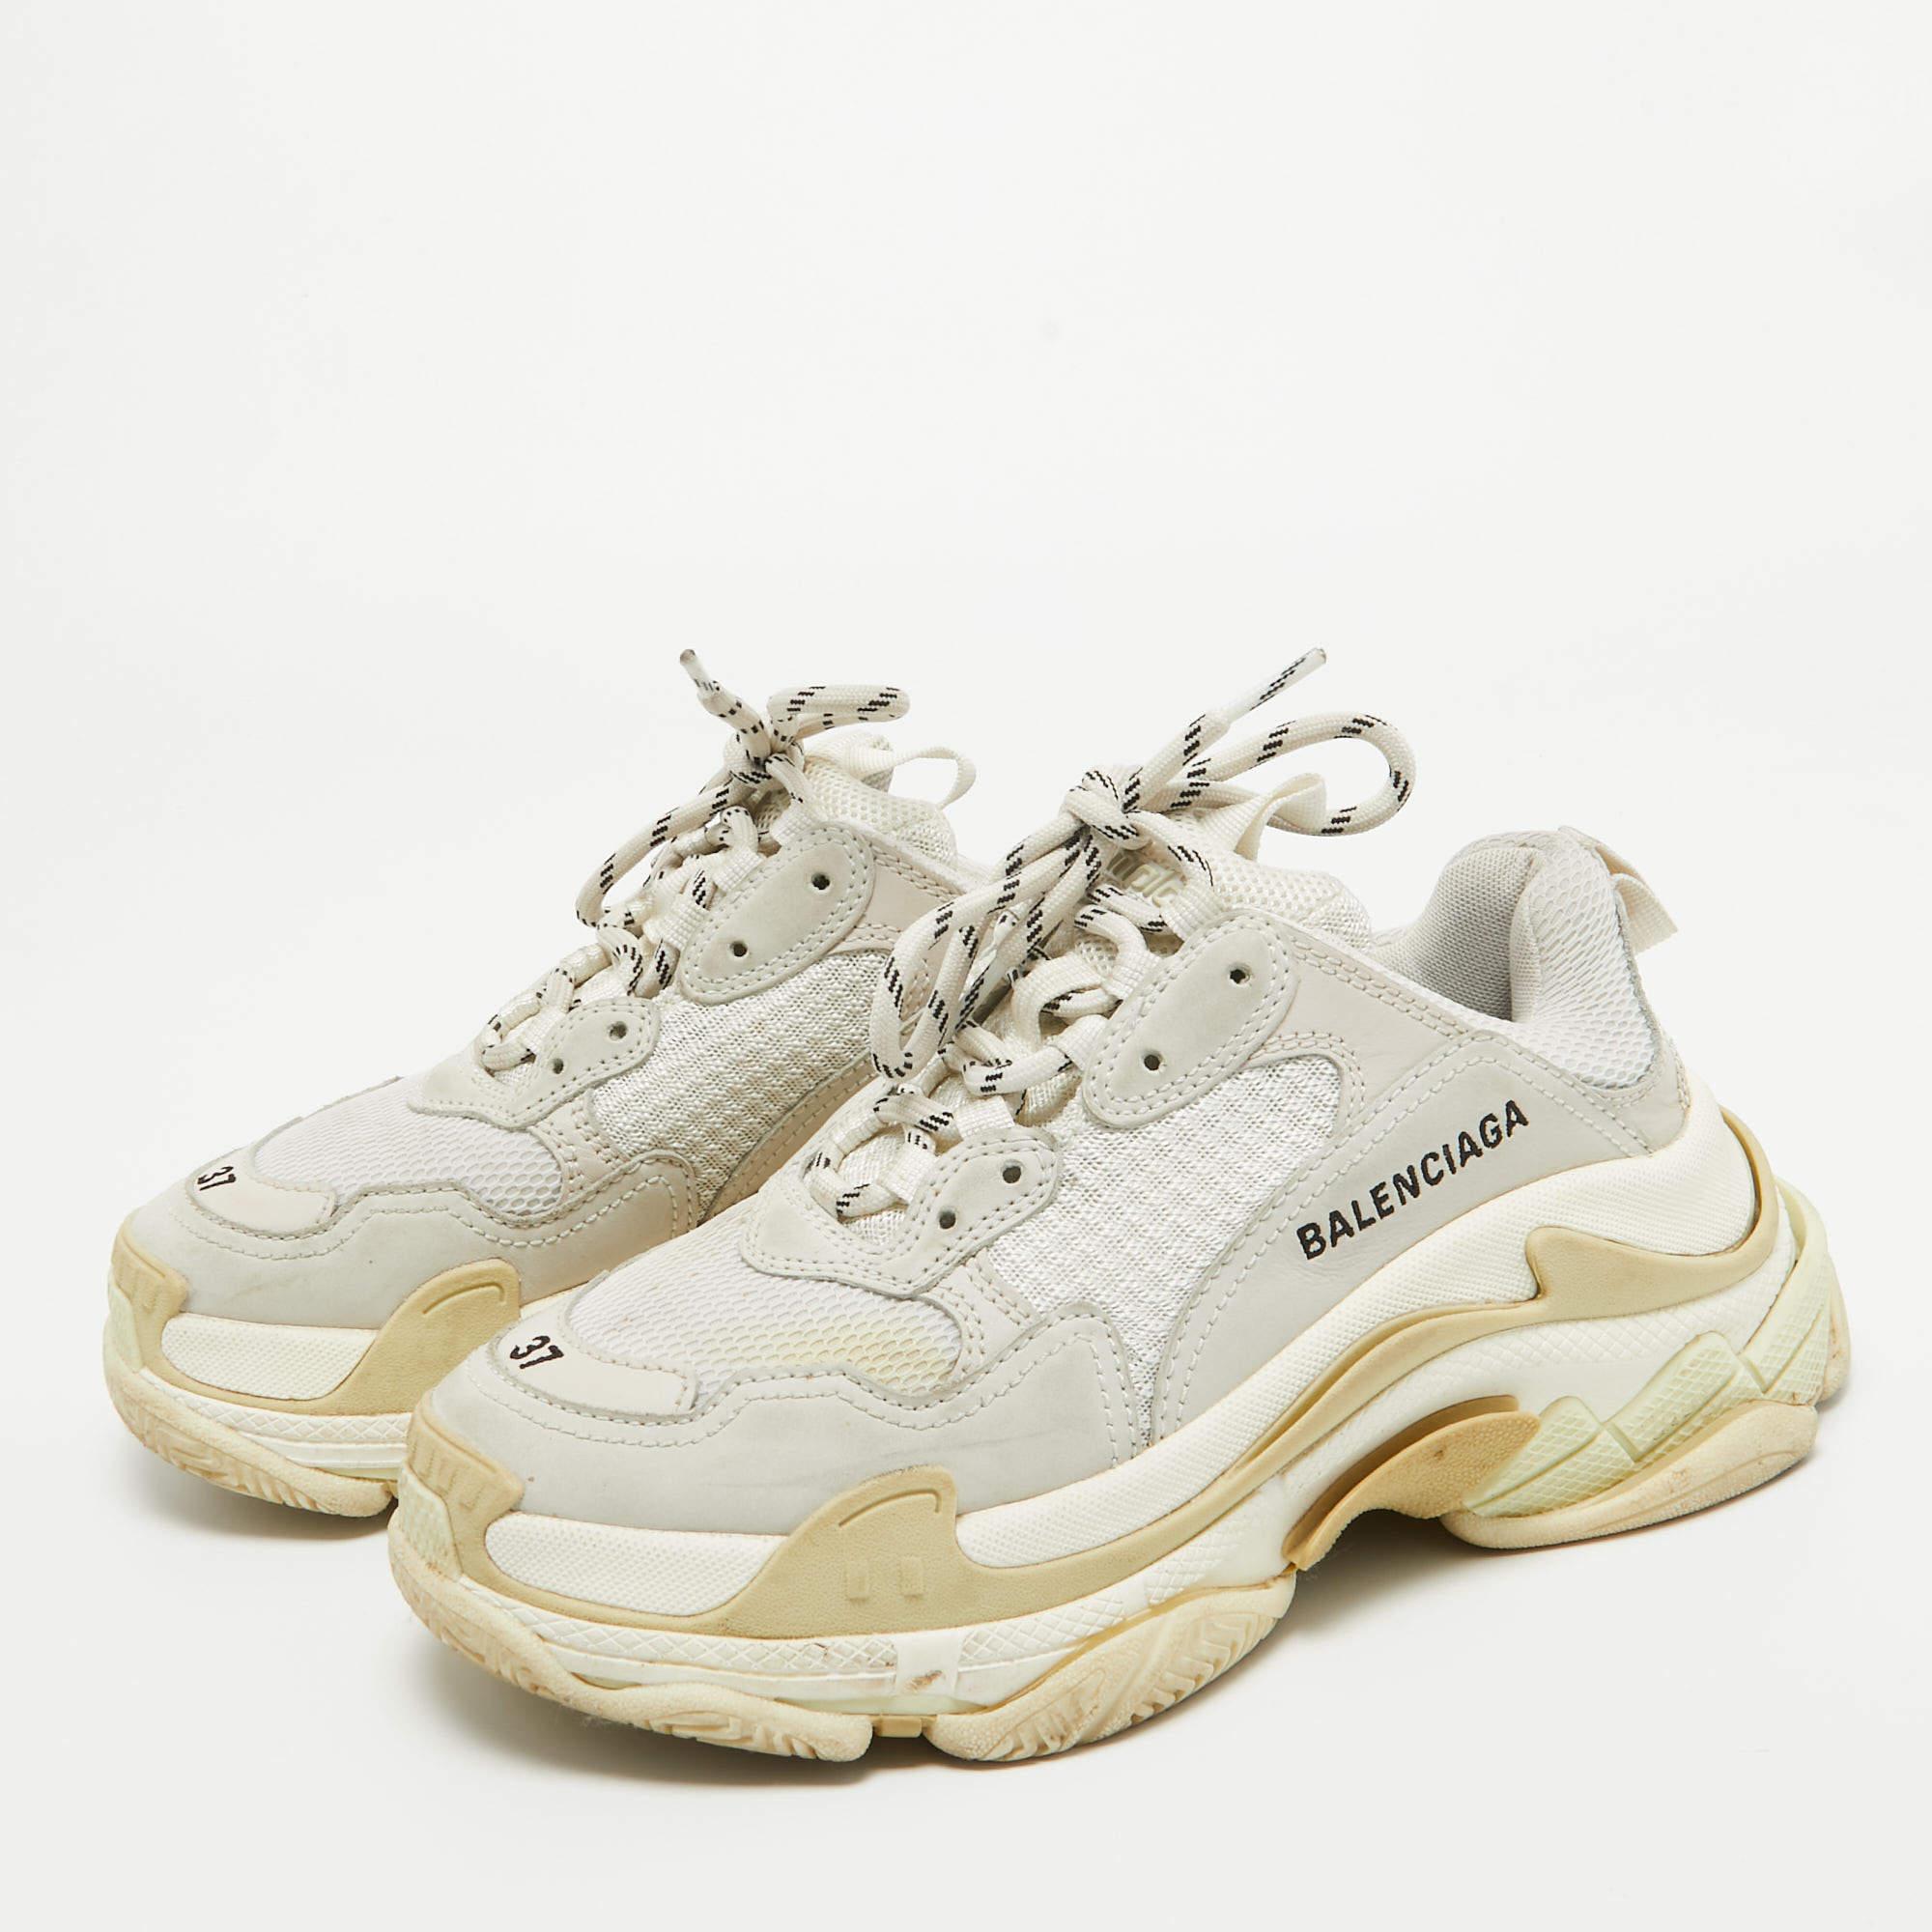 Balenciaga White/Grey Mesh and Leather Triple S Low Top Sneakers Size 37 3